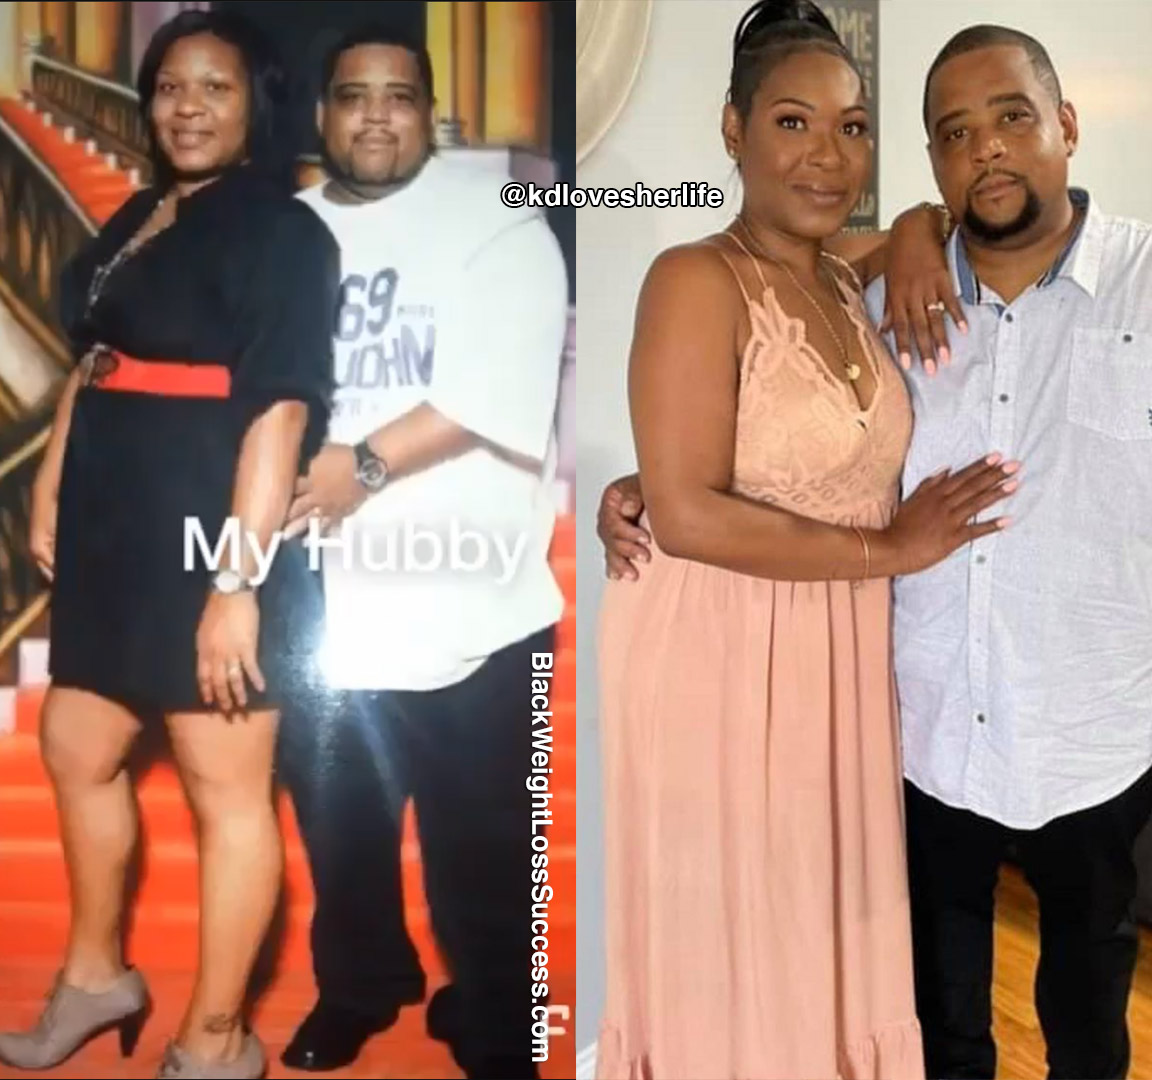 Keyona before and after weight loss